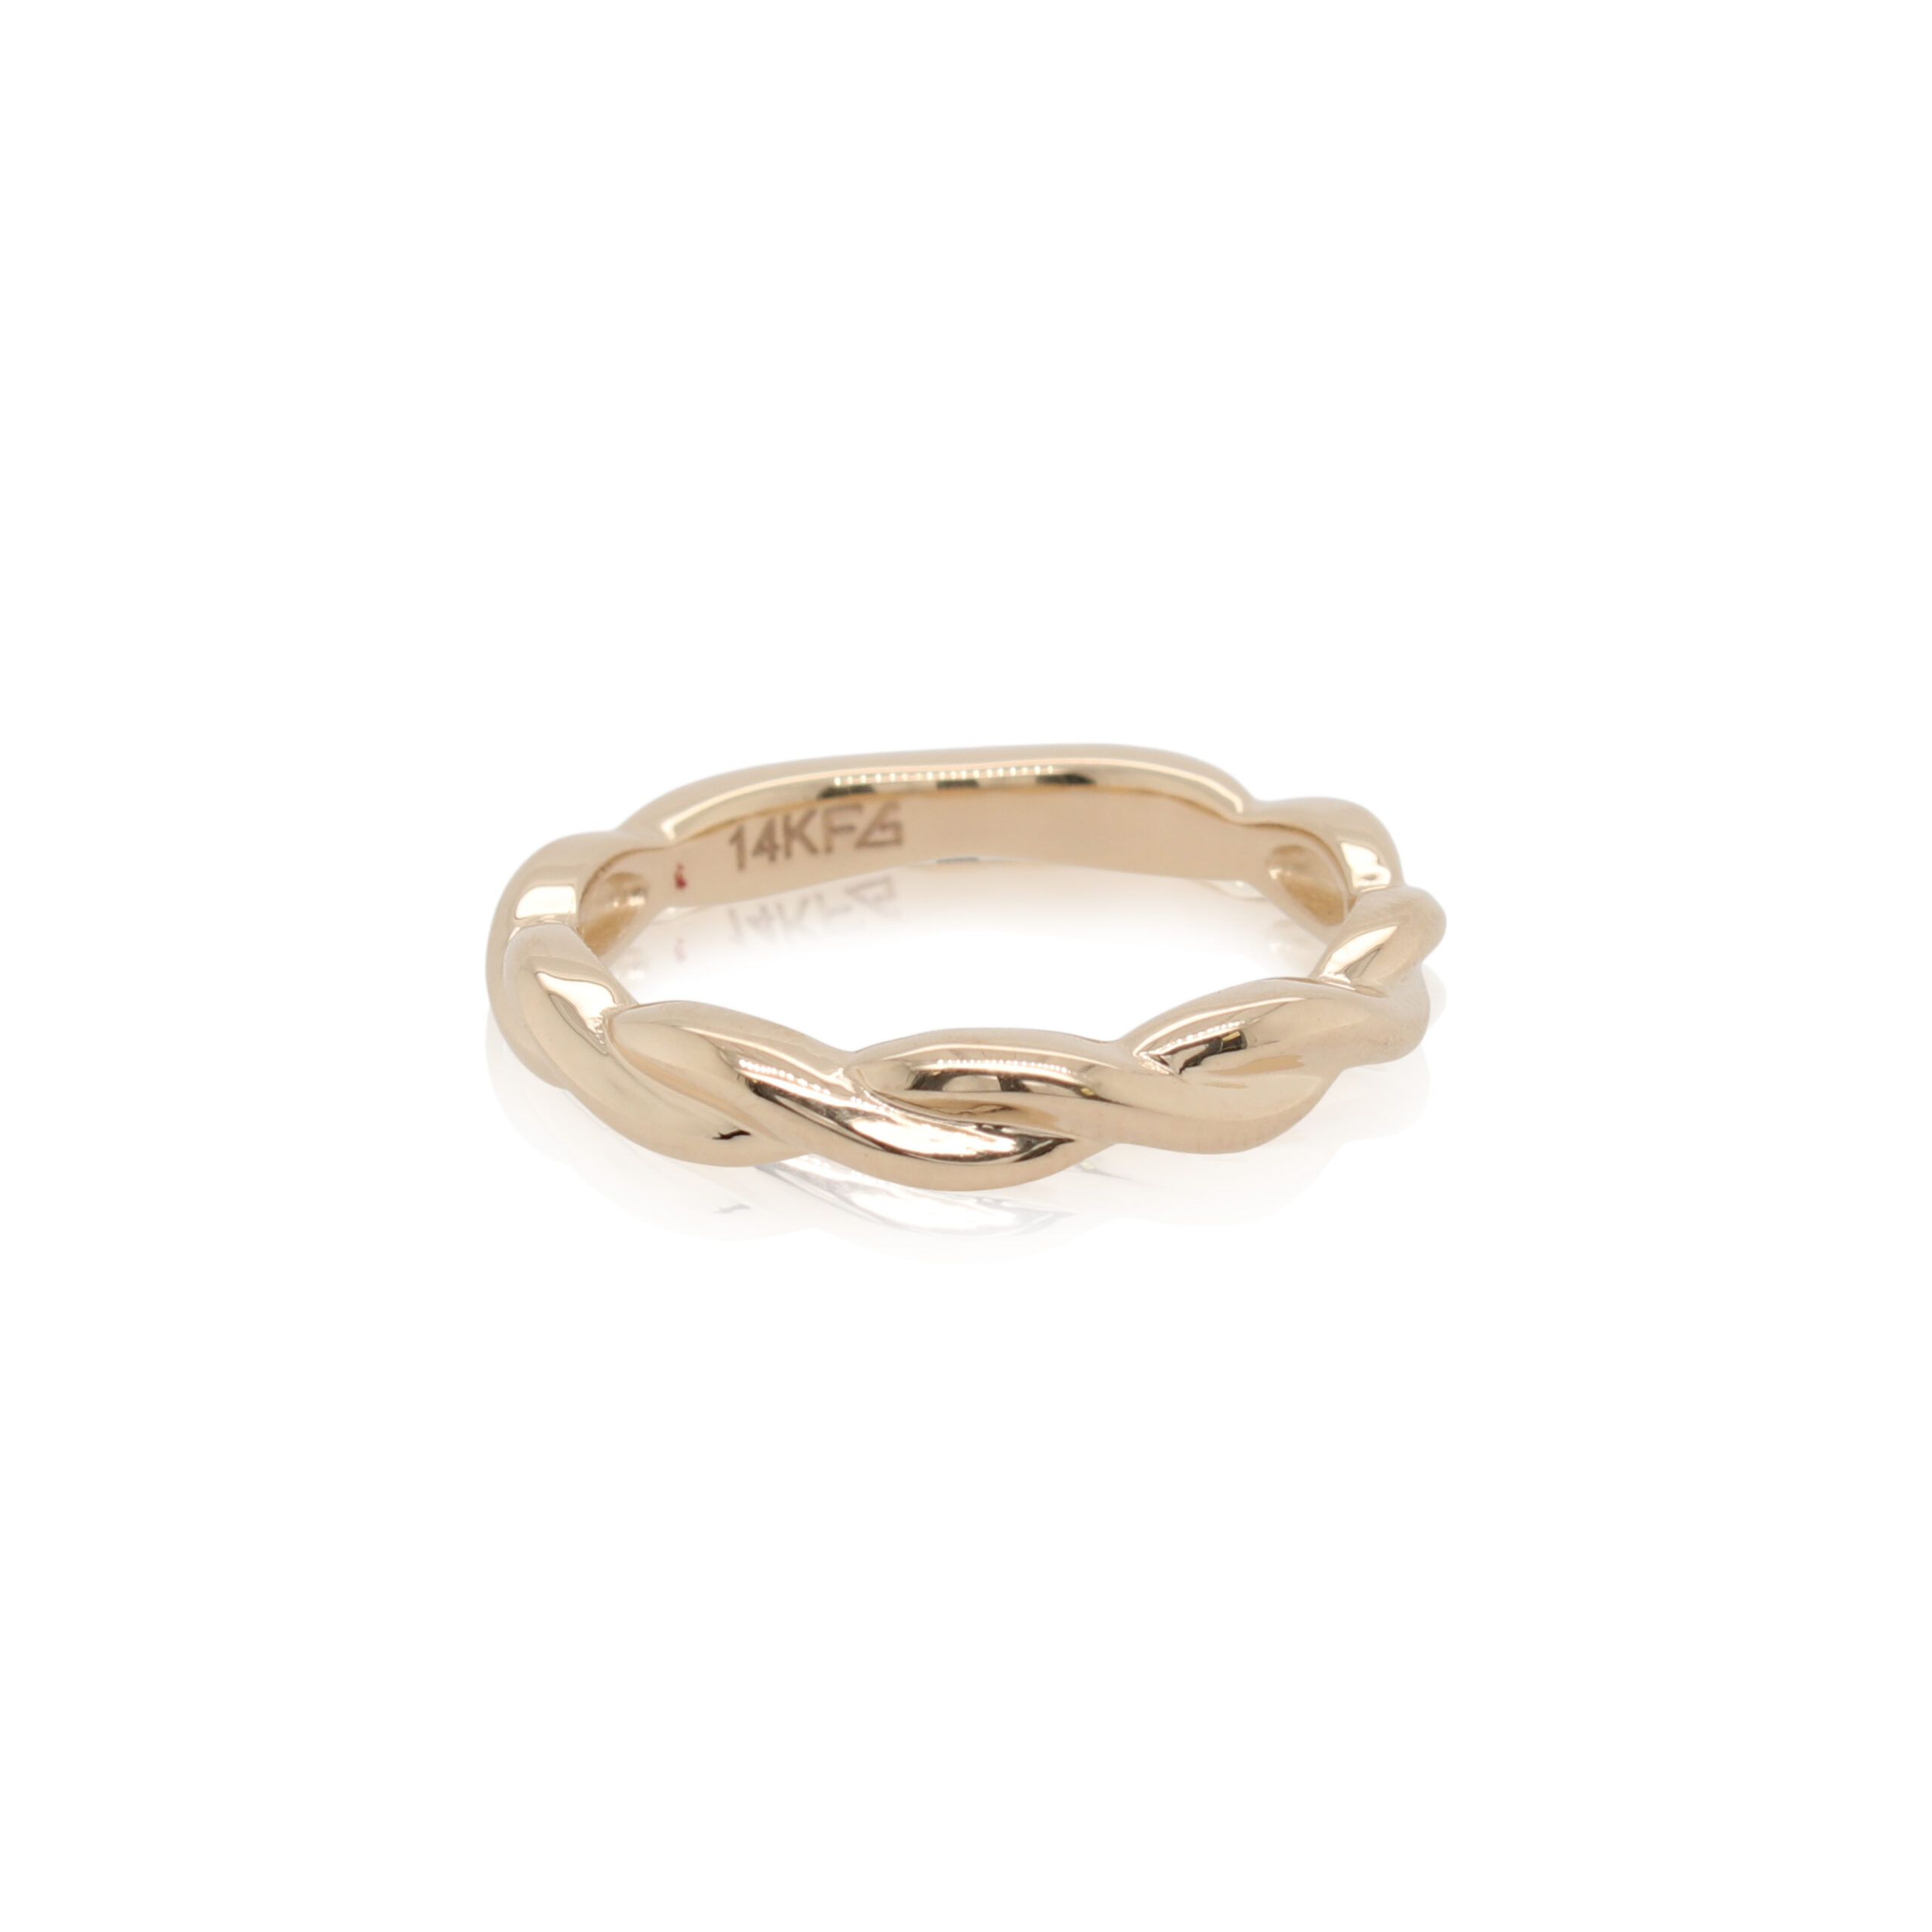 110735Yellow Gold Stackable Twist Band.jpg